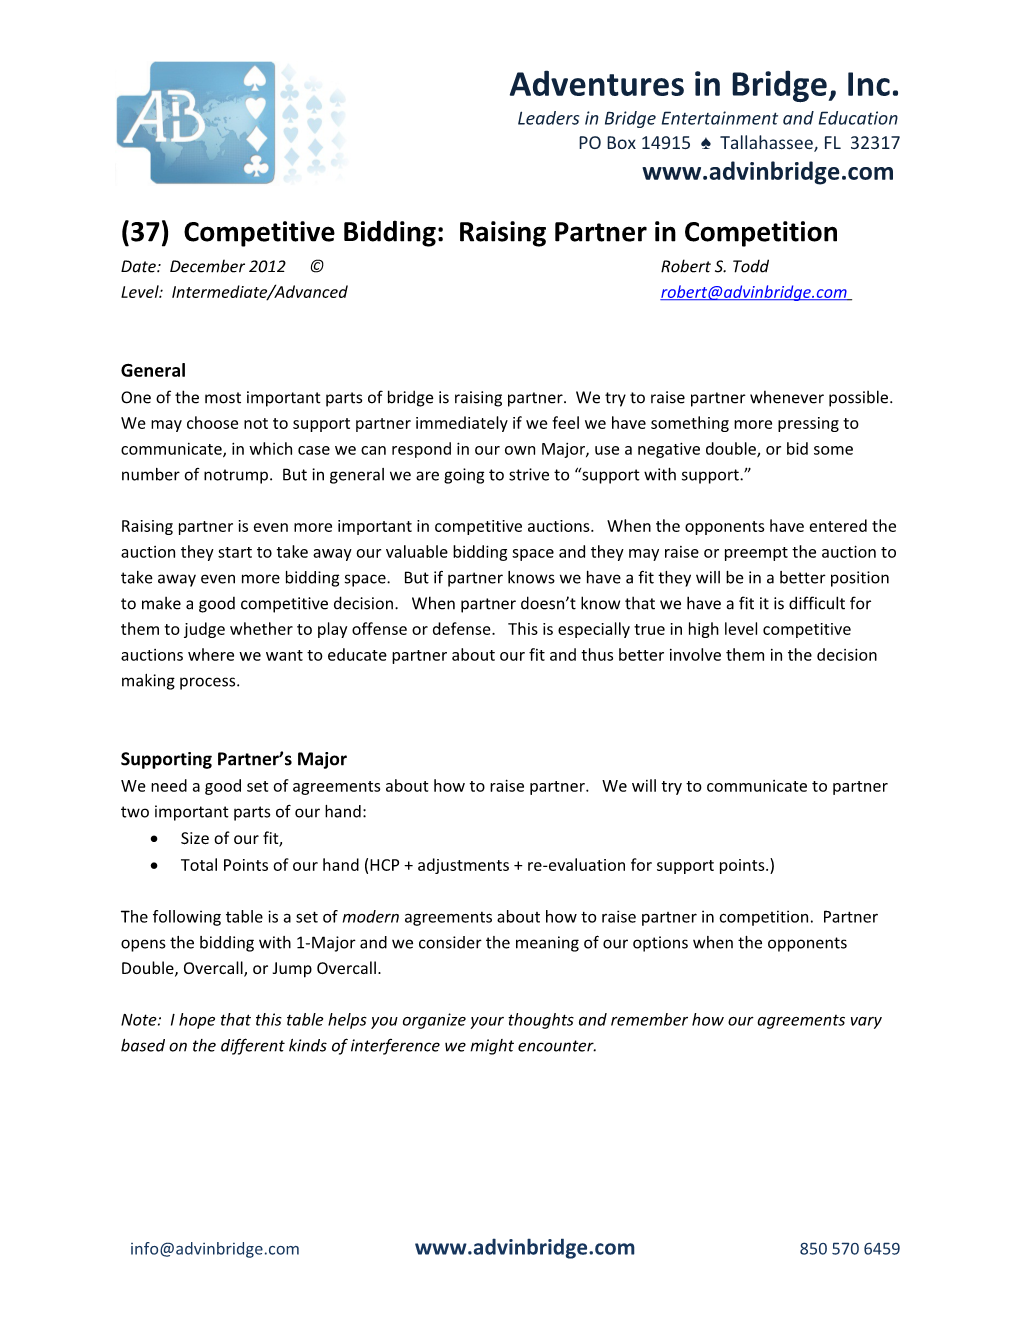 (37) Competitive Bidding: Raising Partner in Competition